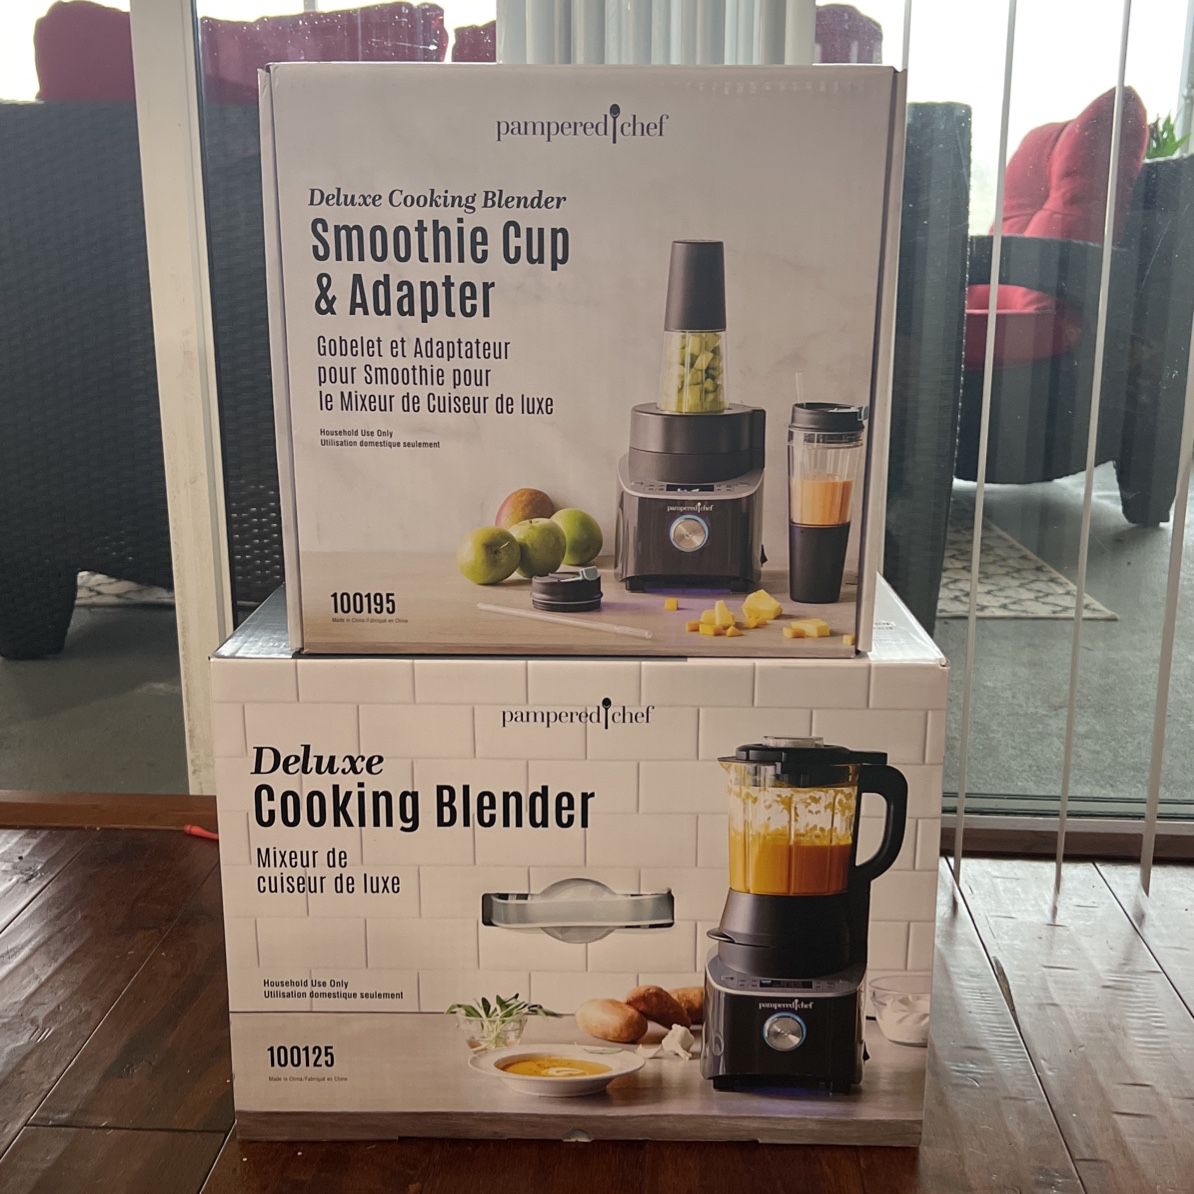 Pampered Chef Deluxe Cooking Blender Smoothie Cup & Adapter 100195